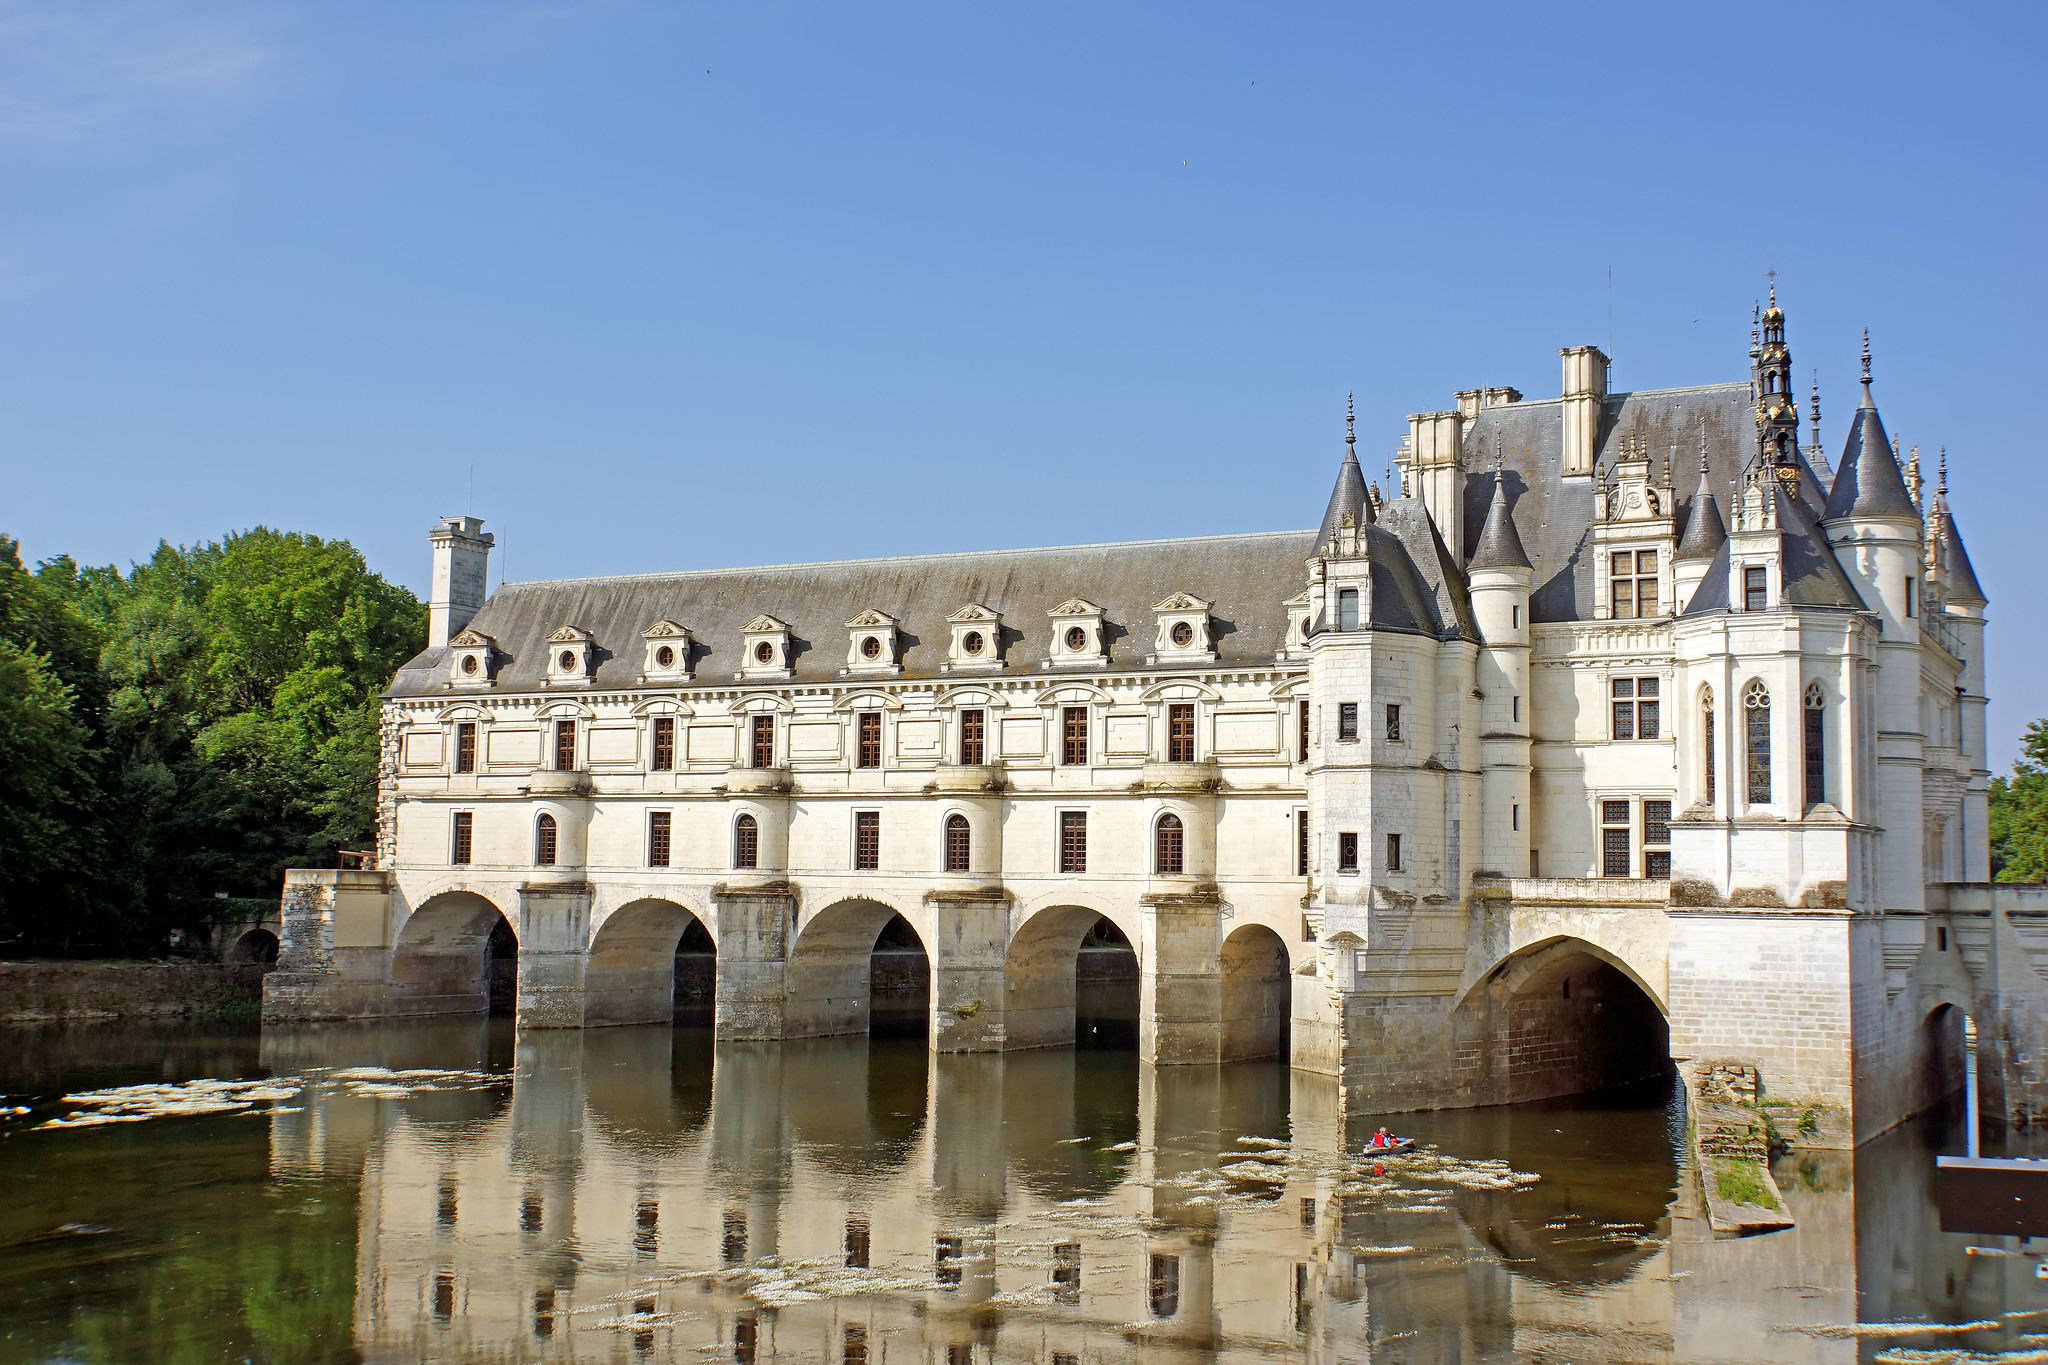 <p>With its perfect gardens, walking onto the grounds of Chteau de Chenonceau<strong> feels like stepping into a fairy tale</strong>. </p>  <p>The castle was originally built in the 11th century, but the its most famous feature, the arched bridge, wasn’t built until the 16th century. </p>  <p>Diane de Poitiers, a mistress of Henry II, commissioned the construction of the bridge and it’s been popular among visitors ever since.</p>